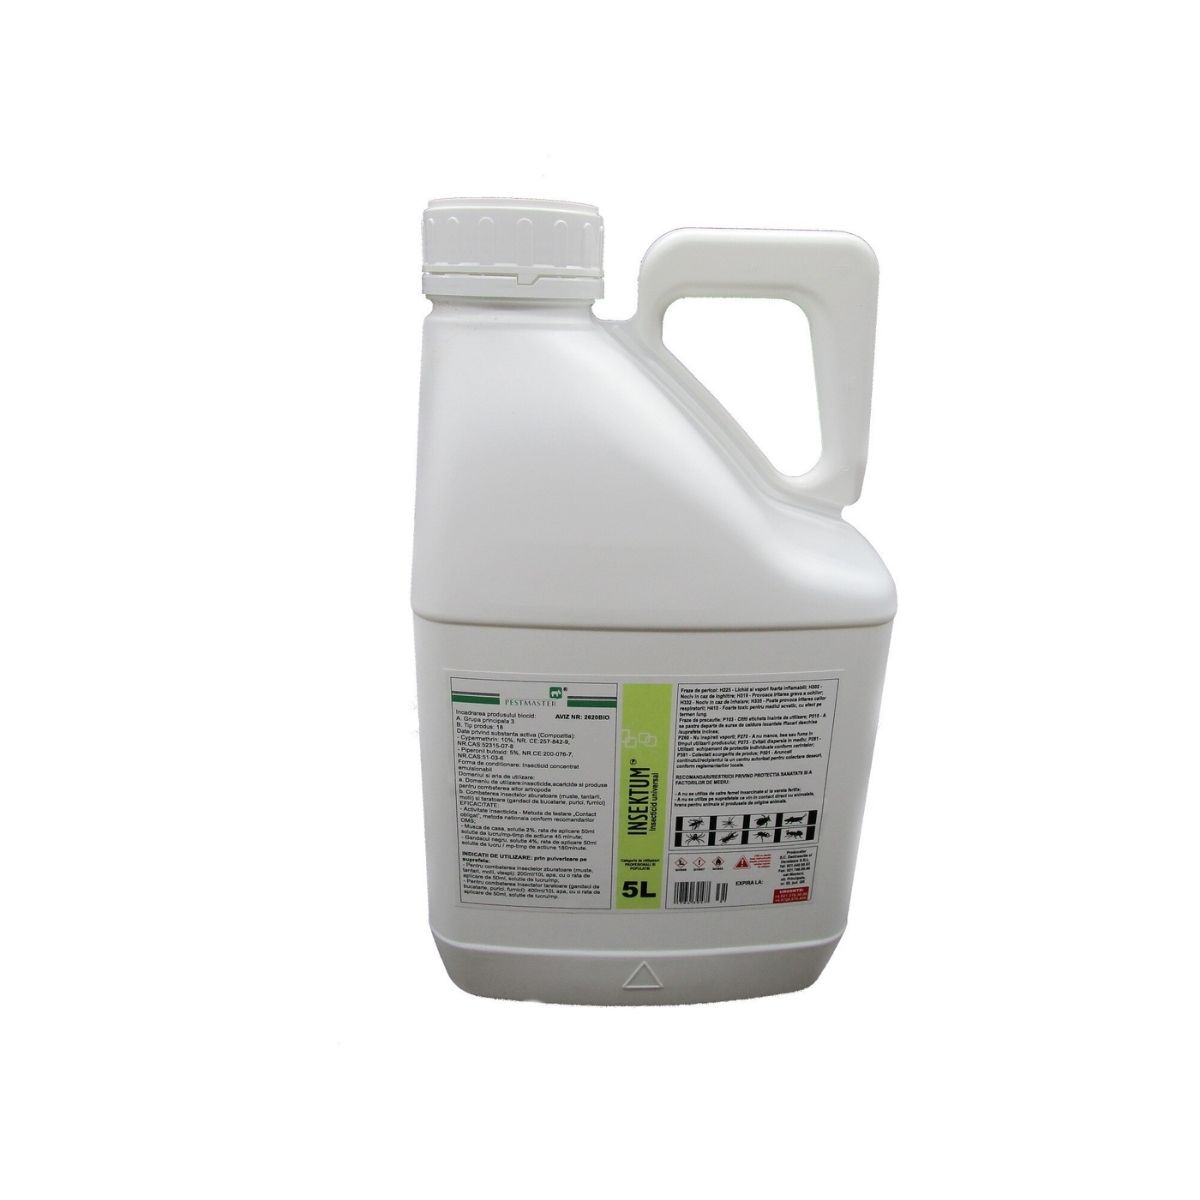 Insecticide - Insecticid concentrat INSEKTUM 5 L ,Pestmaster, hectarul.ro